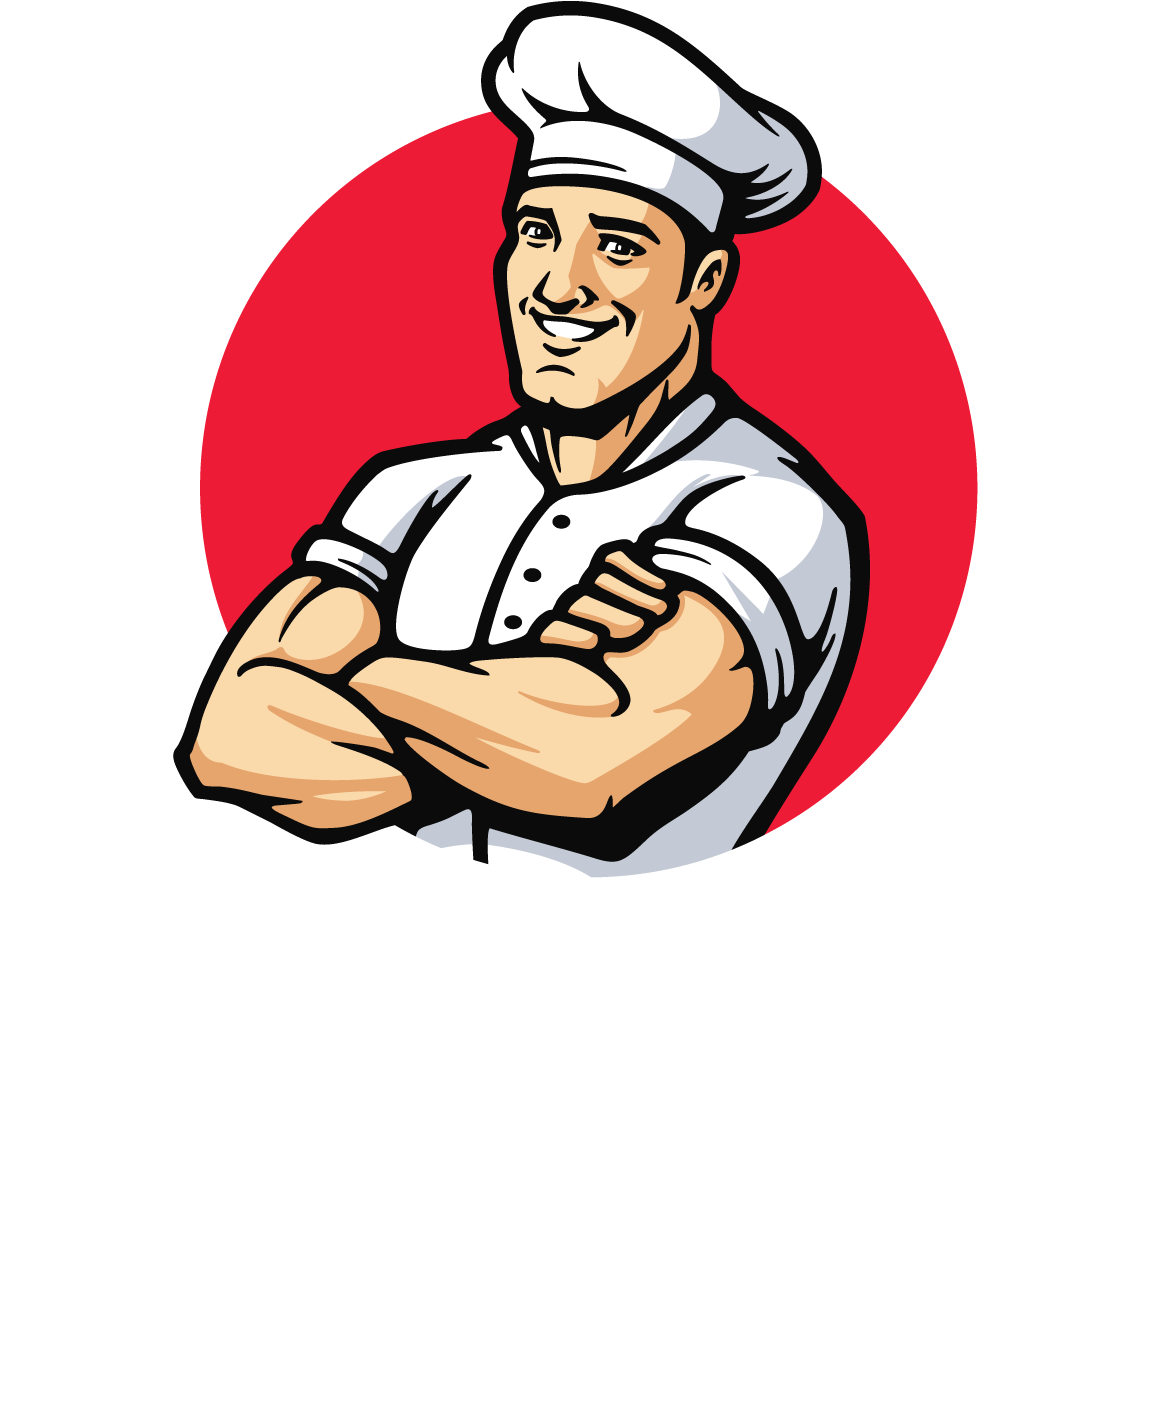 Order Now - My Muscle Chef (2000x1956)